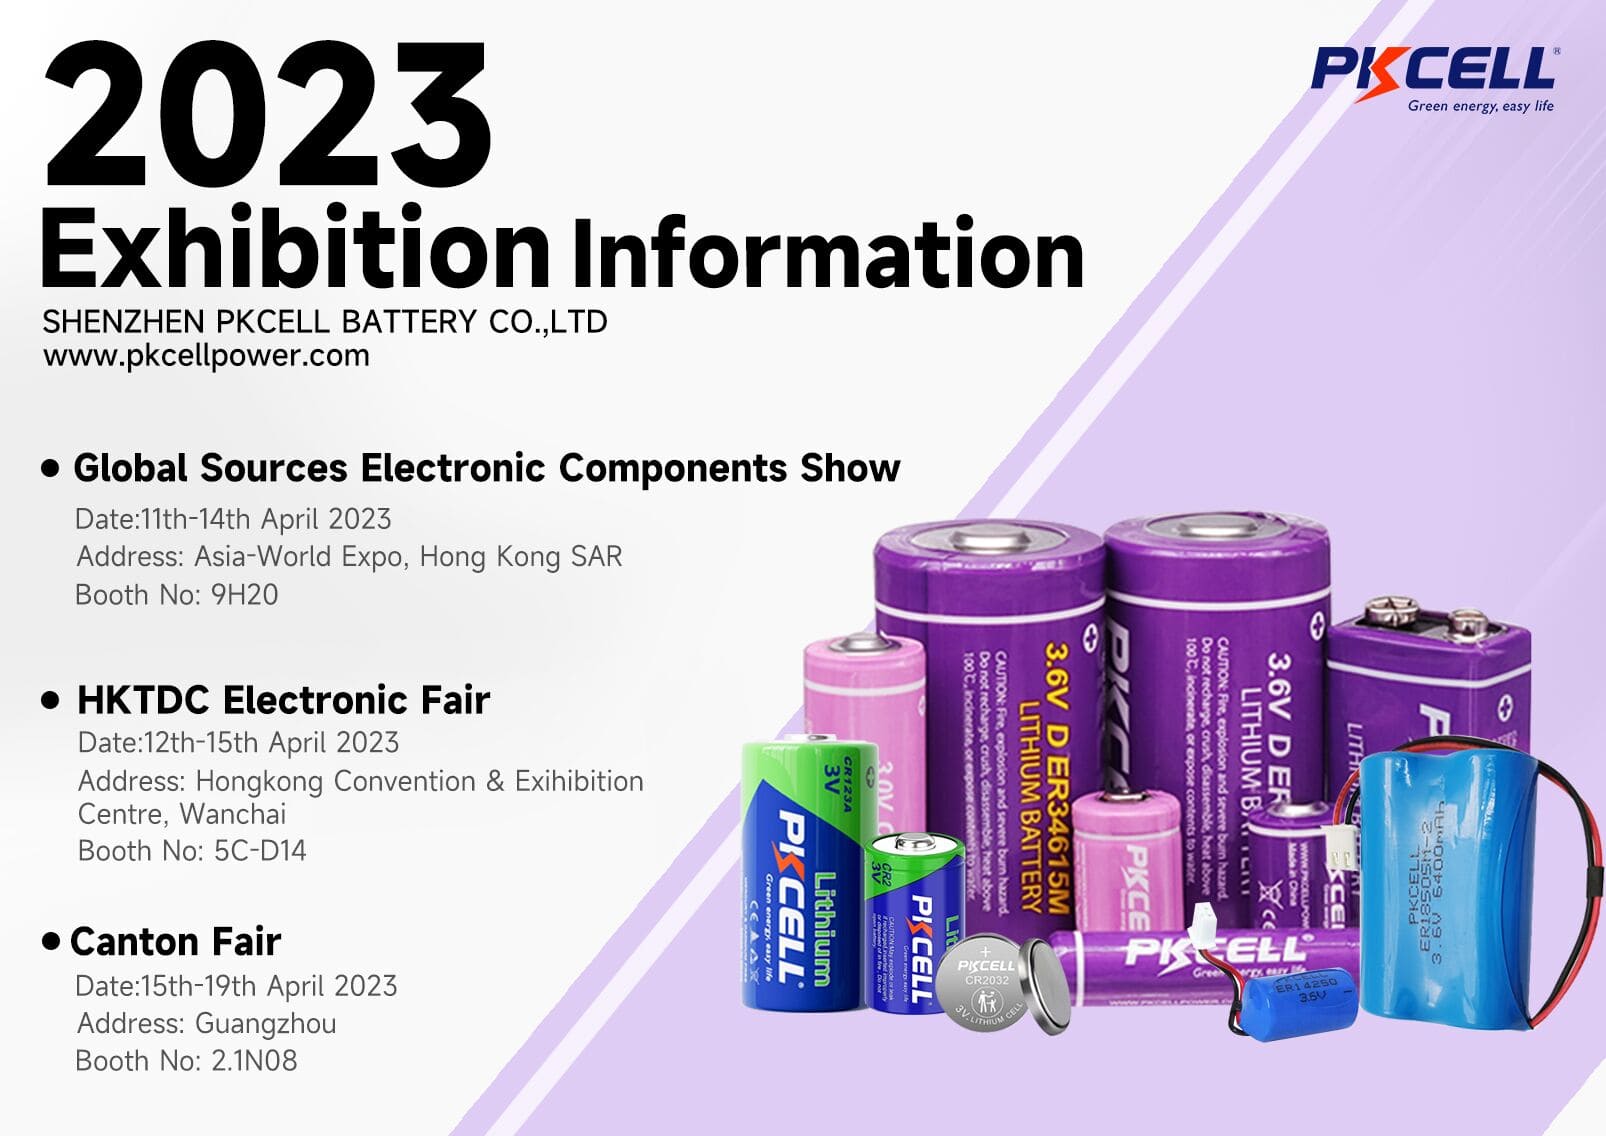 Welcome to visit our PKCELL BATTERY booth